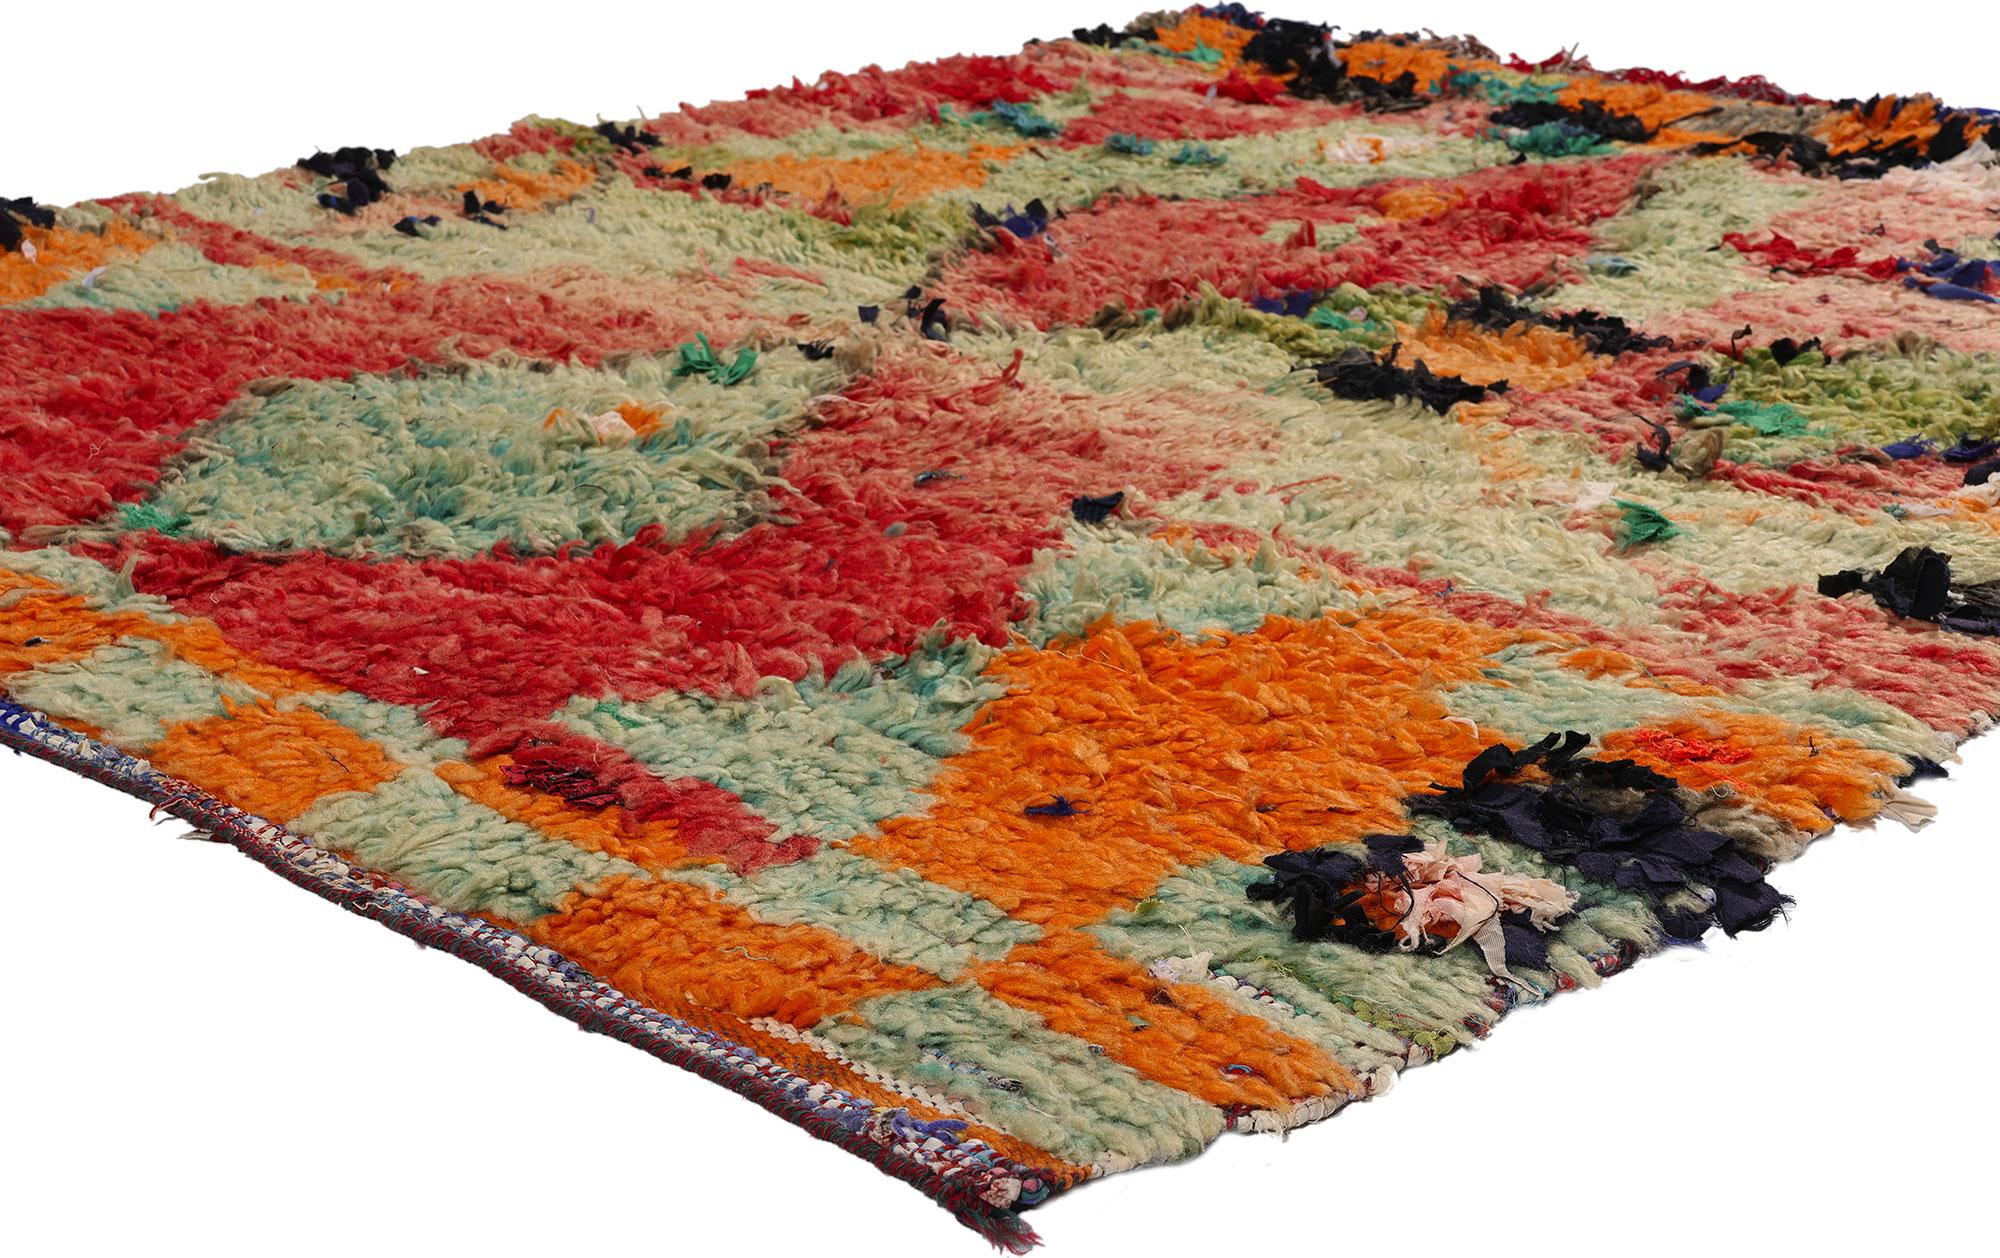 21787 Vintage Boucherouite Boujad Moroccan Rag Rug, 05'01 x 06'00. The Boujad rag rug, or Boujad Boucherouite rug, encapsulates the essence of sustainable craftsmanship, originating from the Boujad region in the Khouribga province of Morocco.